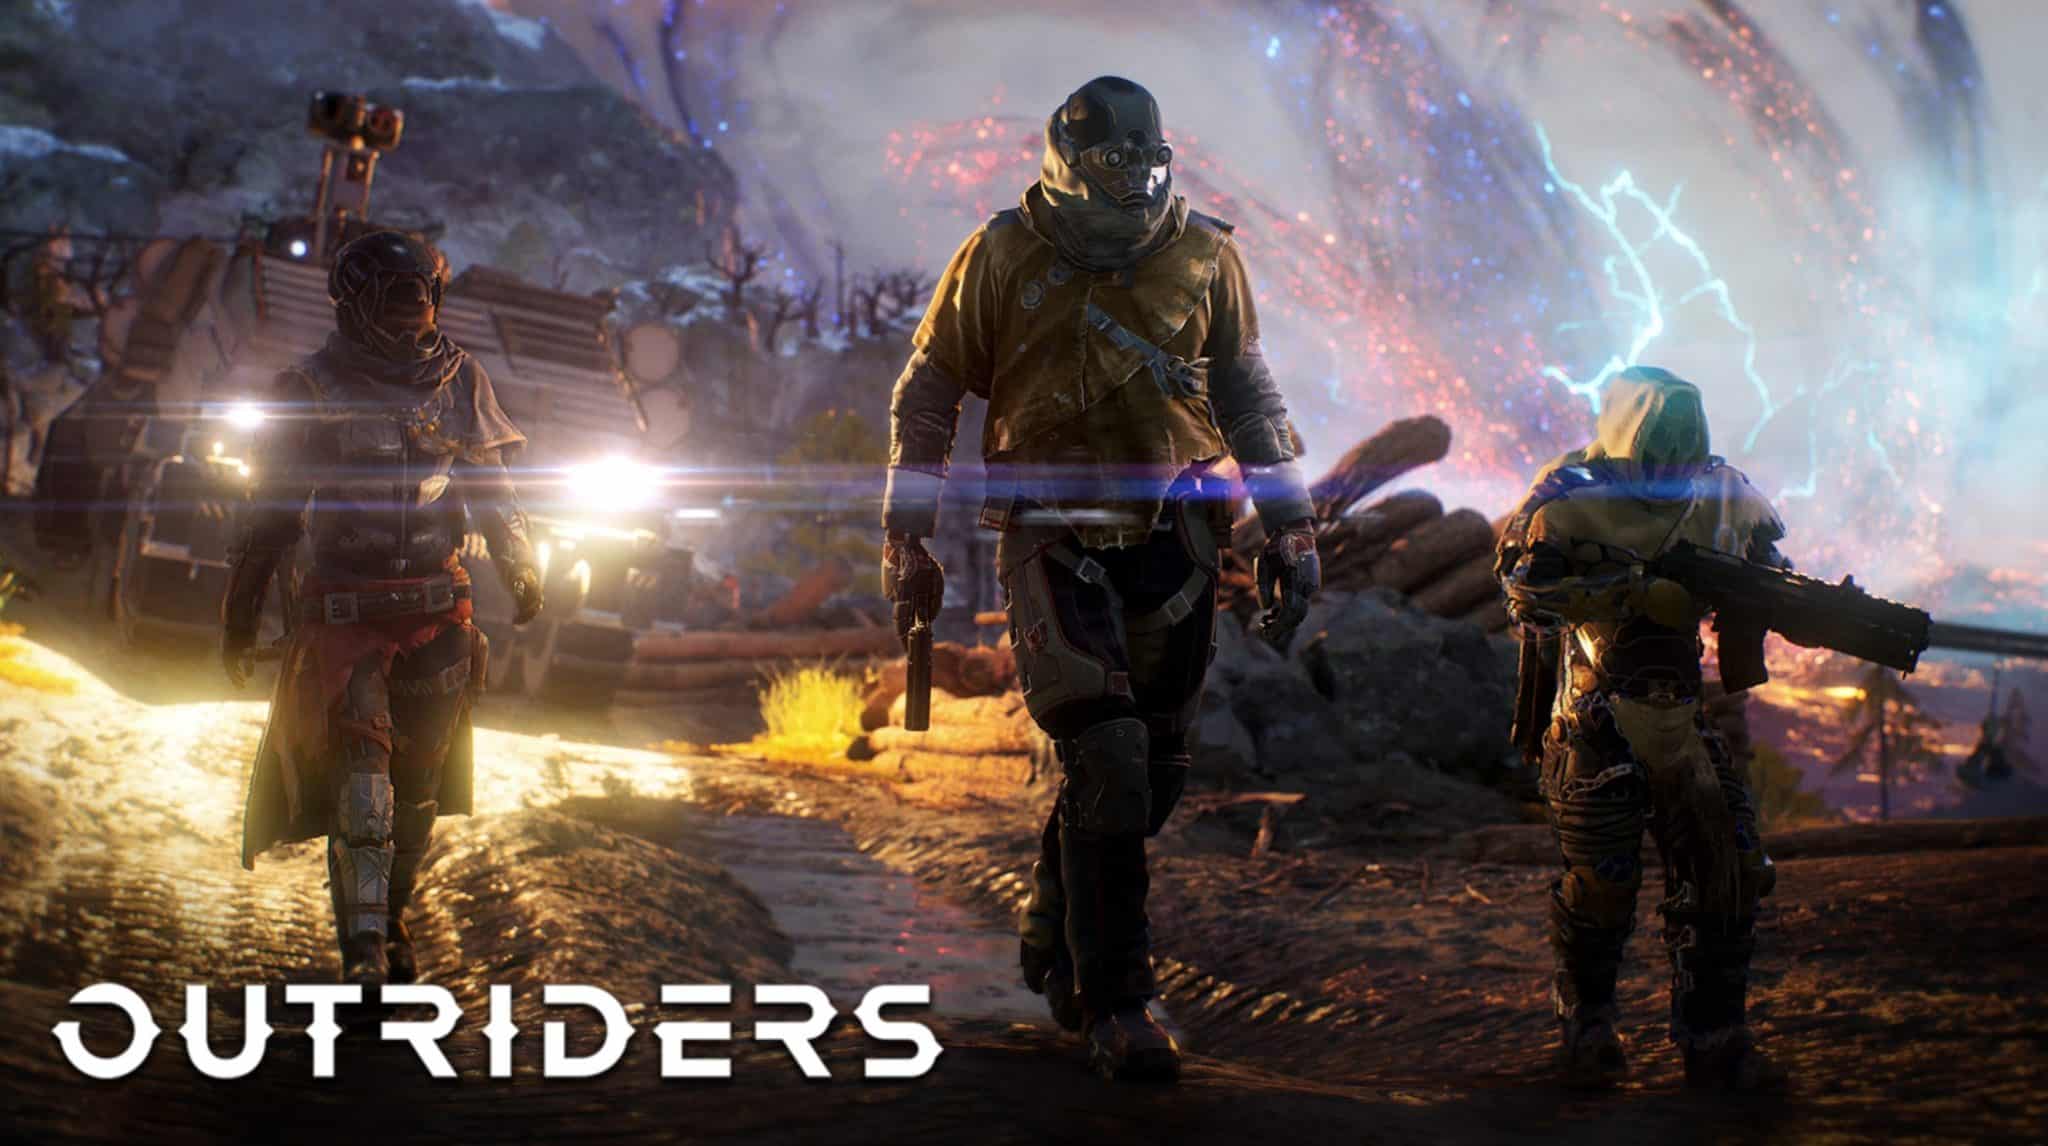 Outriders gameplay